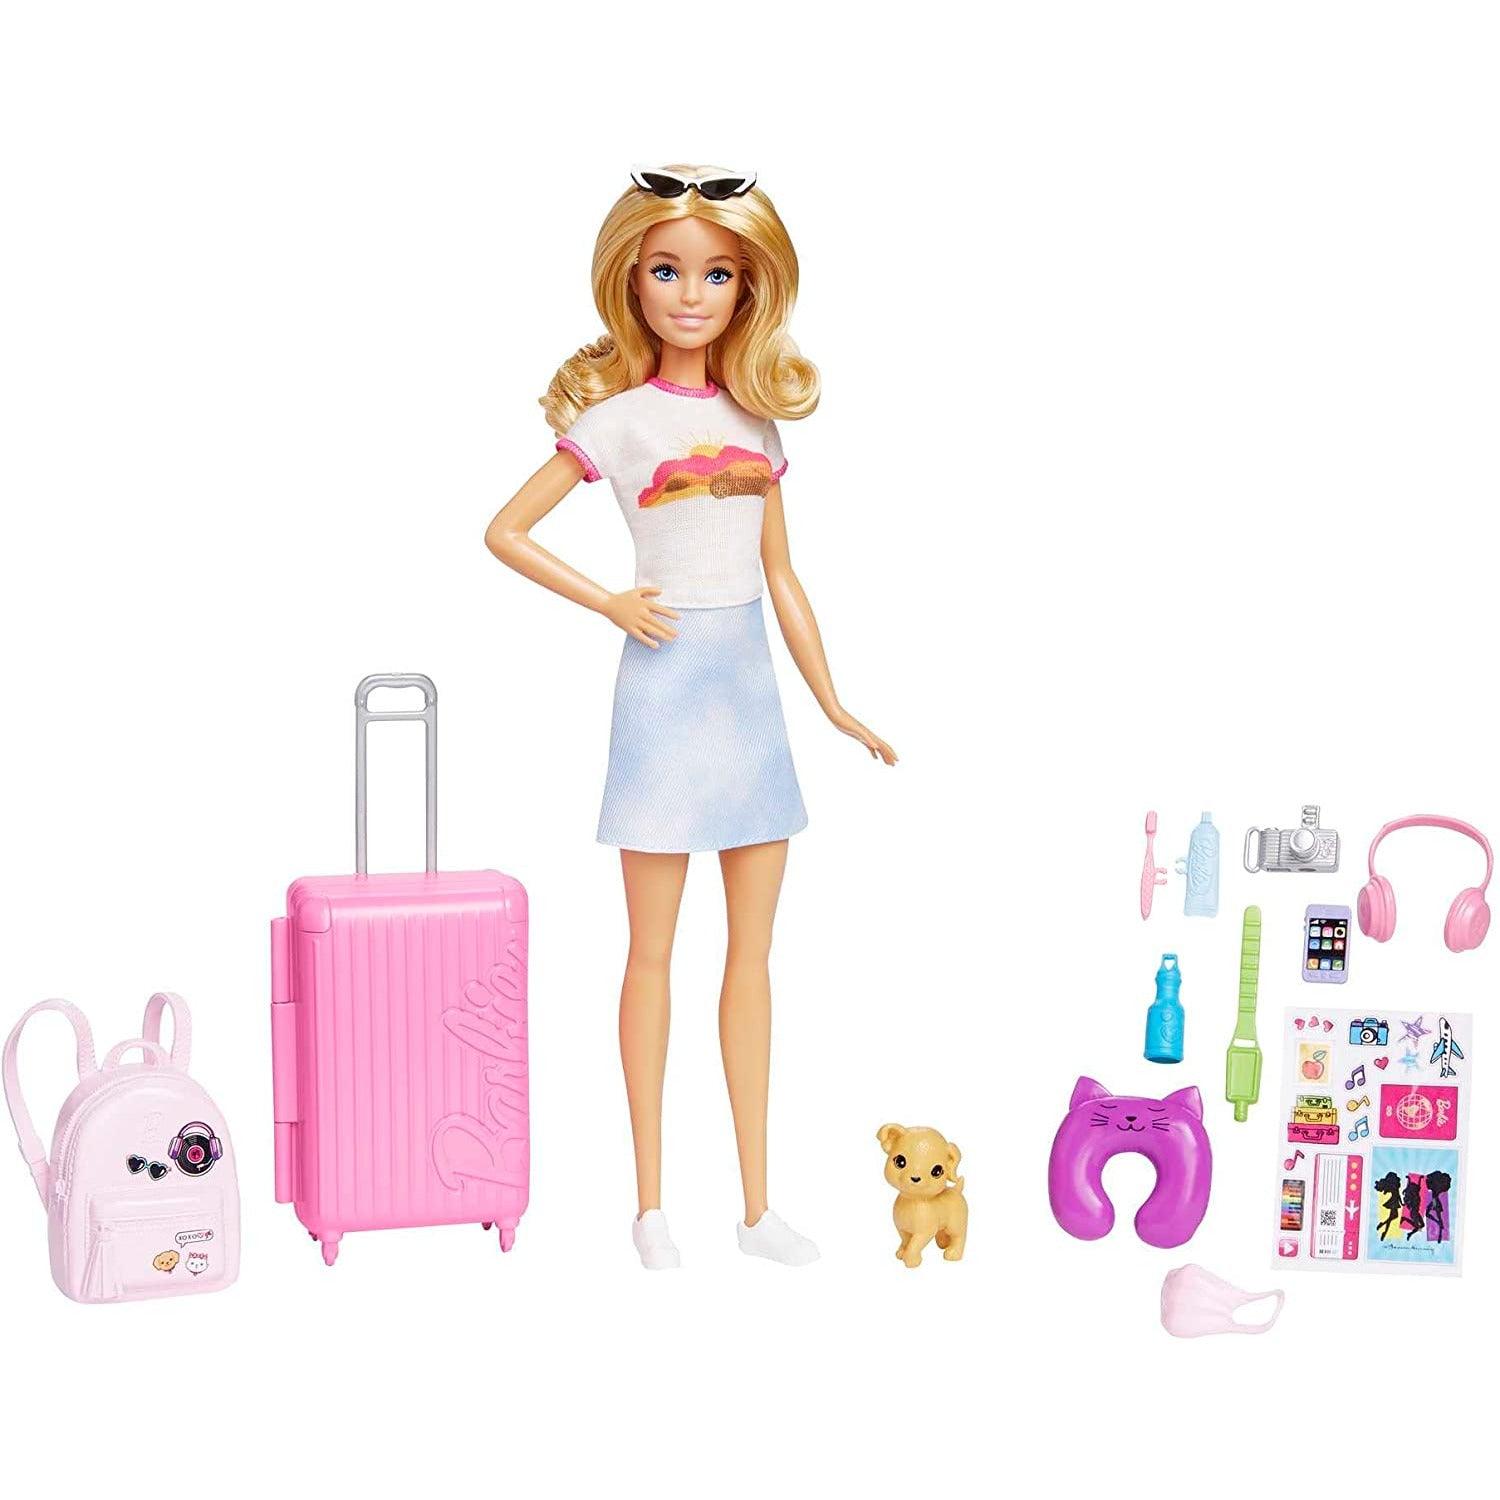 Barbie Doll & Accessories, Travel Set with Puppy, Malibu Doll with Blonde Hair - BumbleToys - 2-4 Years, 3+ years, 4+ Years, 5-7 Years, Barbie, Dolls, Fashion Dolls & Accessories, Girls, Pre-Order